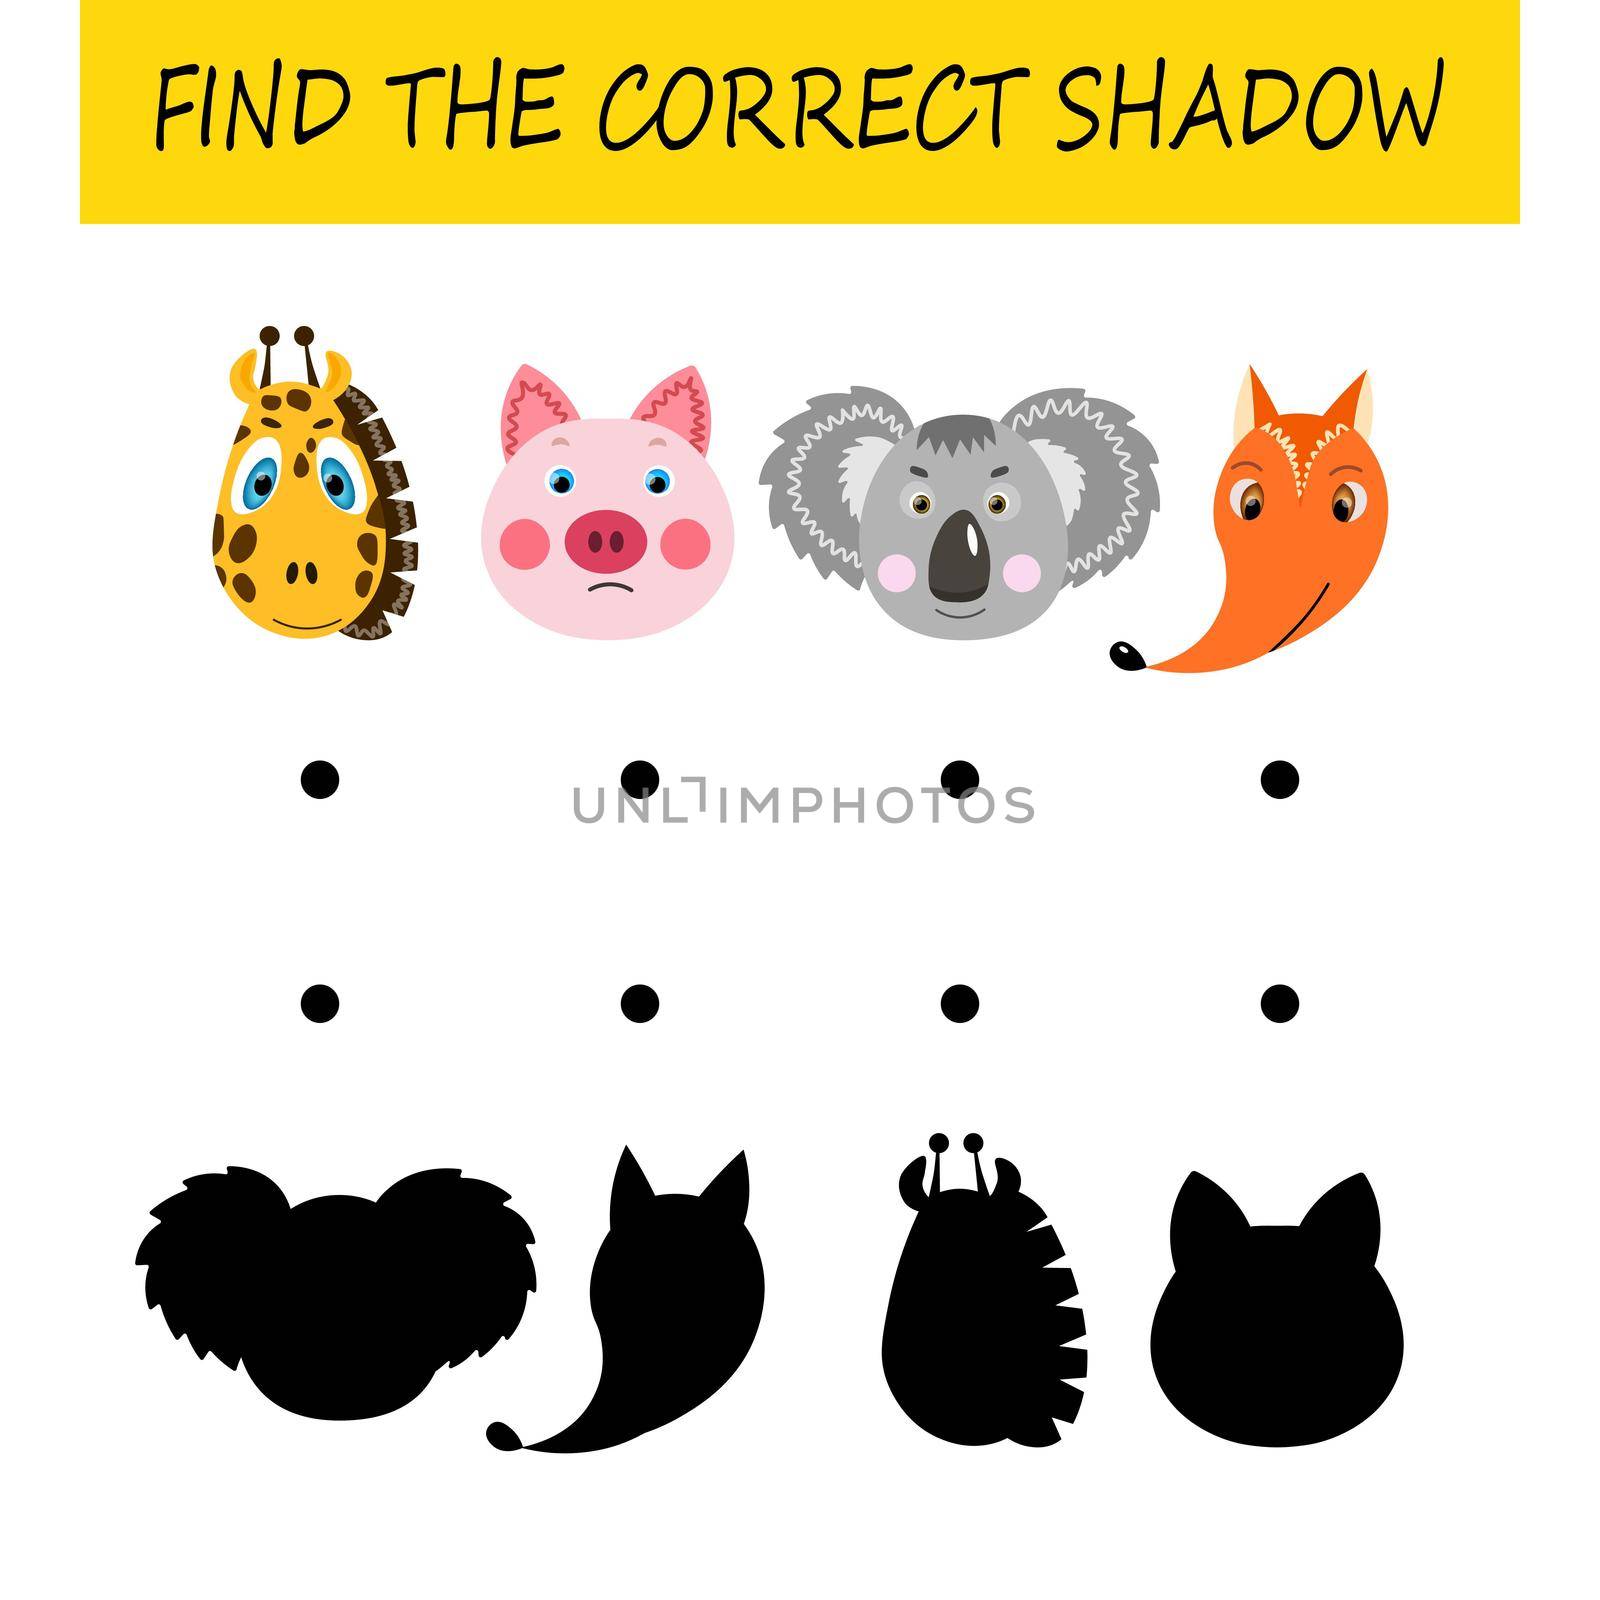 Find the correct shadow. Educational card for children. Cute animals. Logic game for kids. Home education. Colorful cartoon vector illustration by allaku